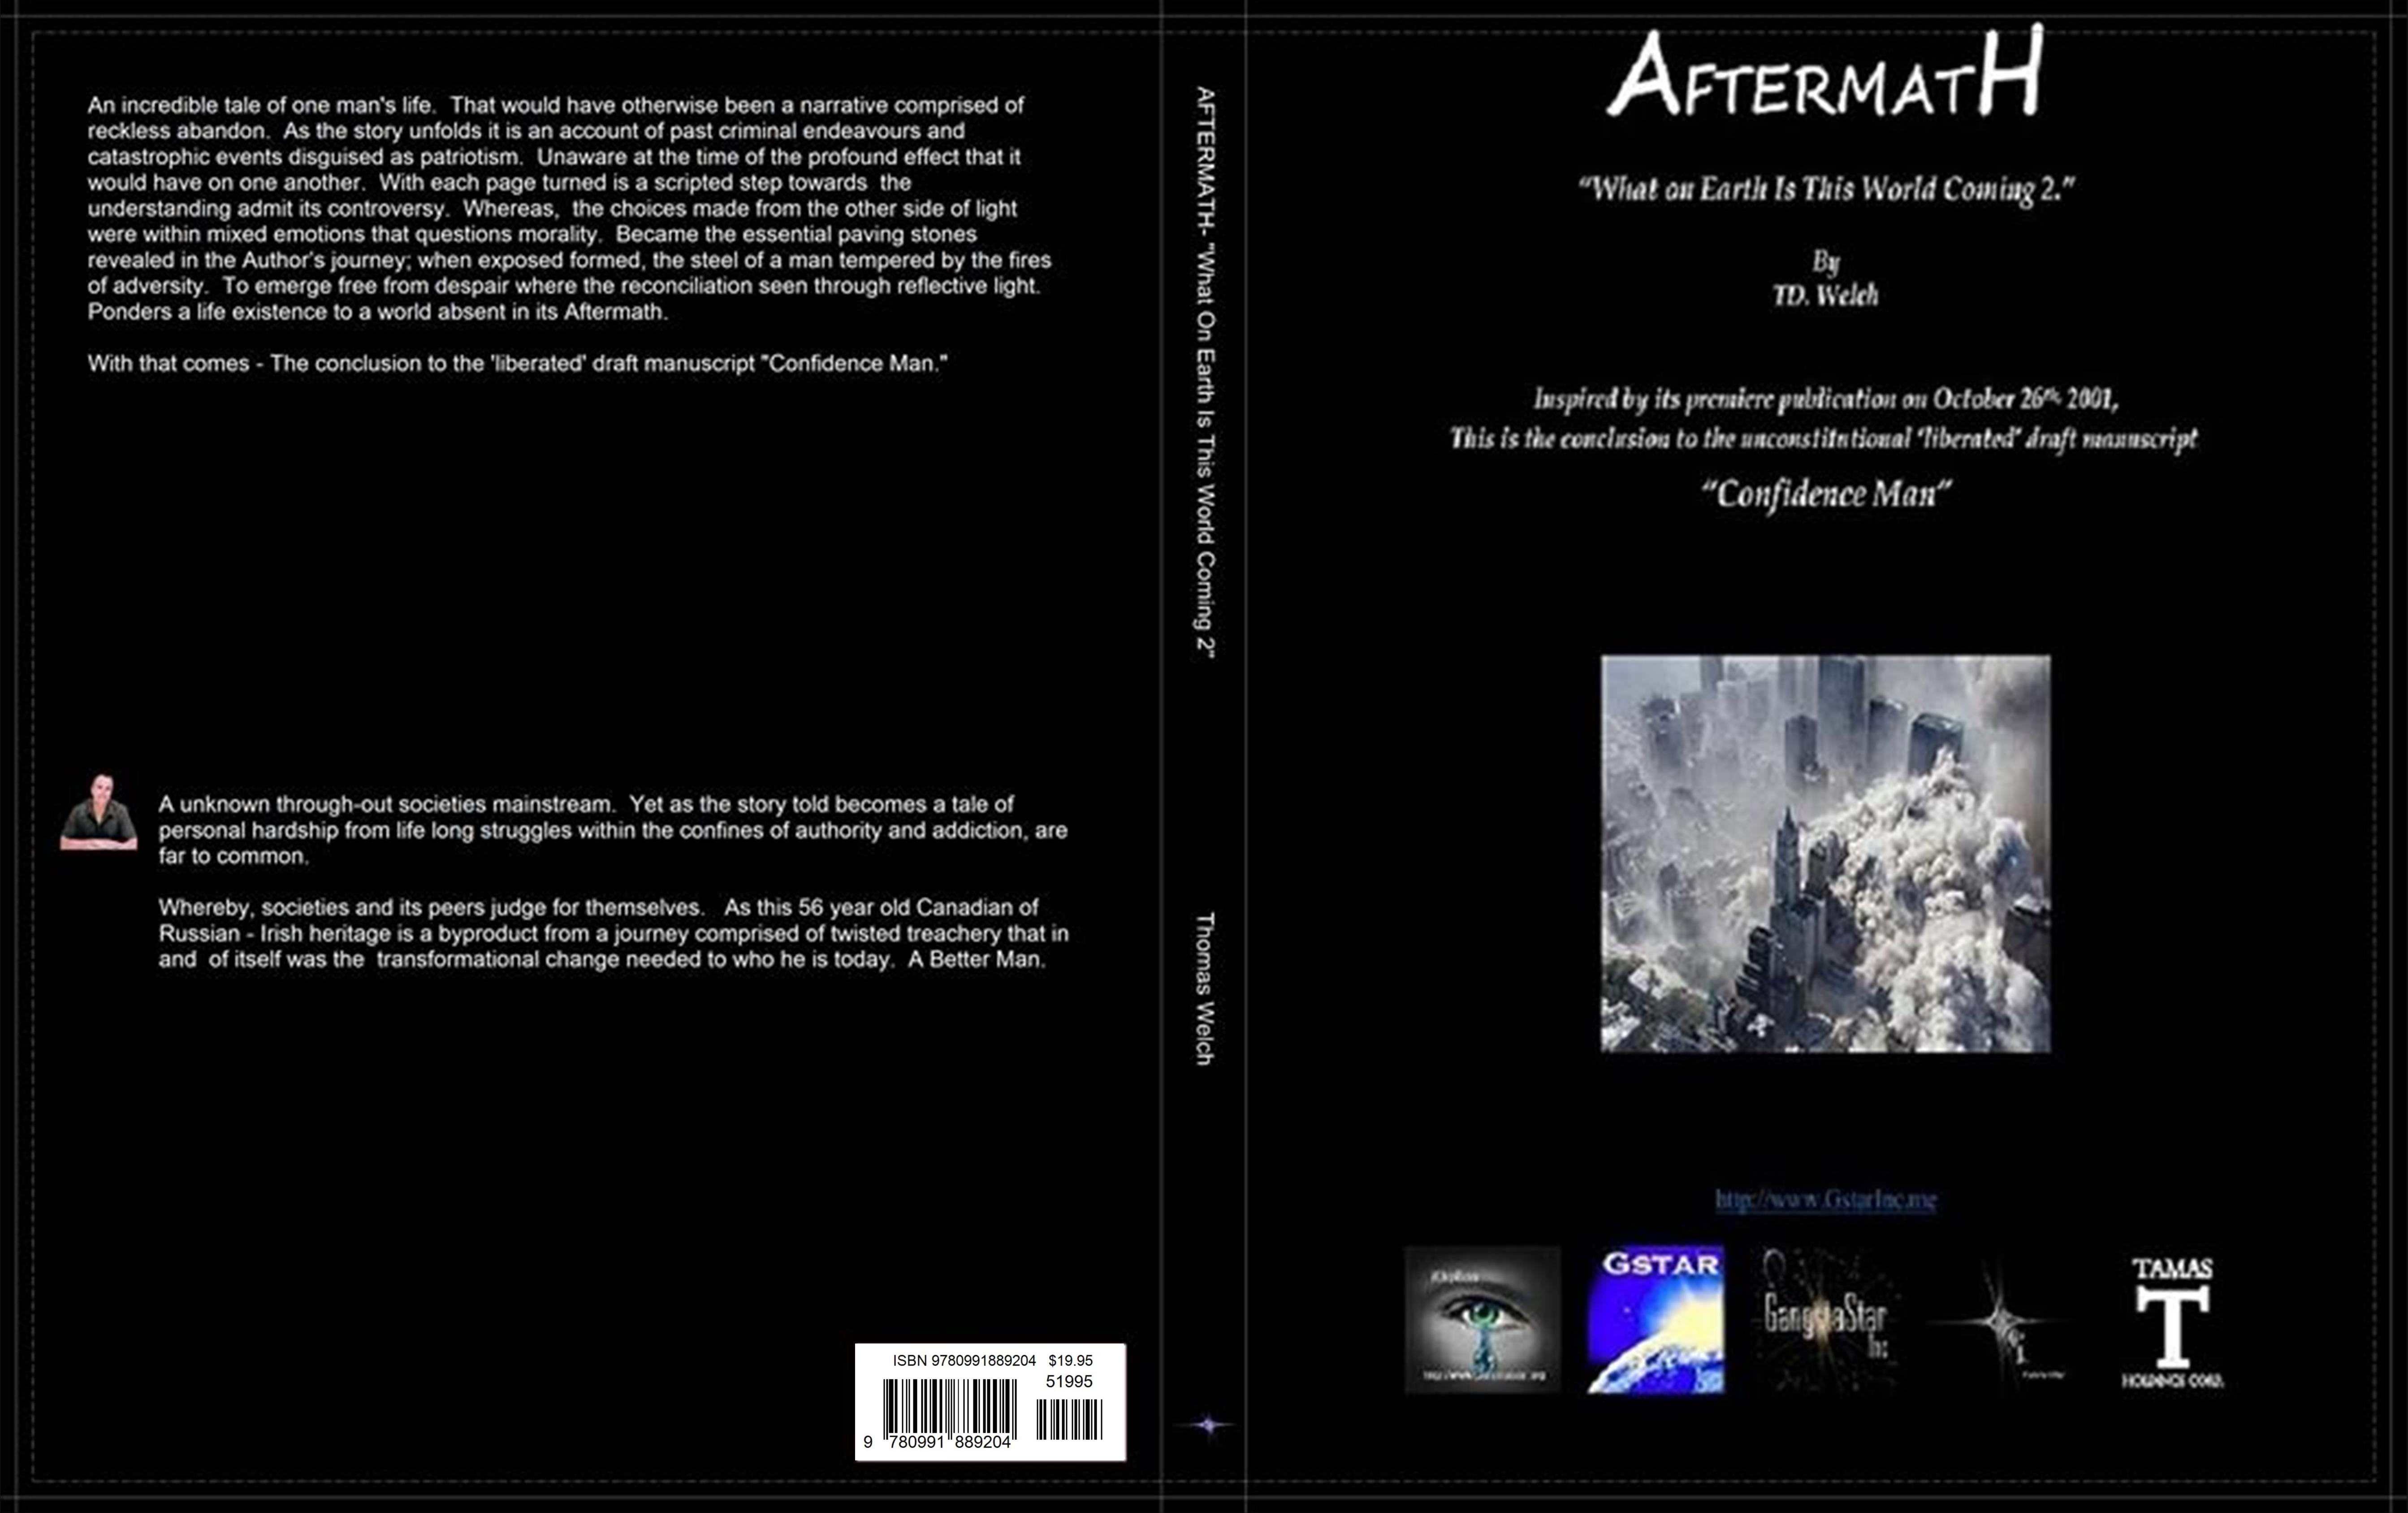 AFTERMATH- "What On Earth Is This World Coming 2" cover image